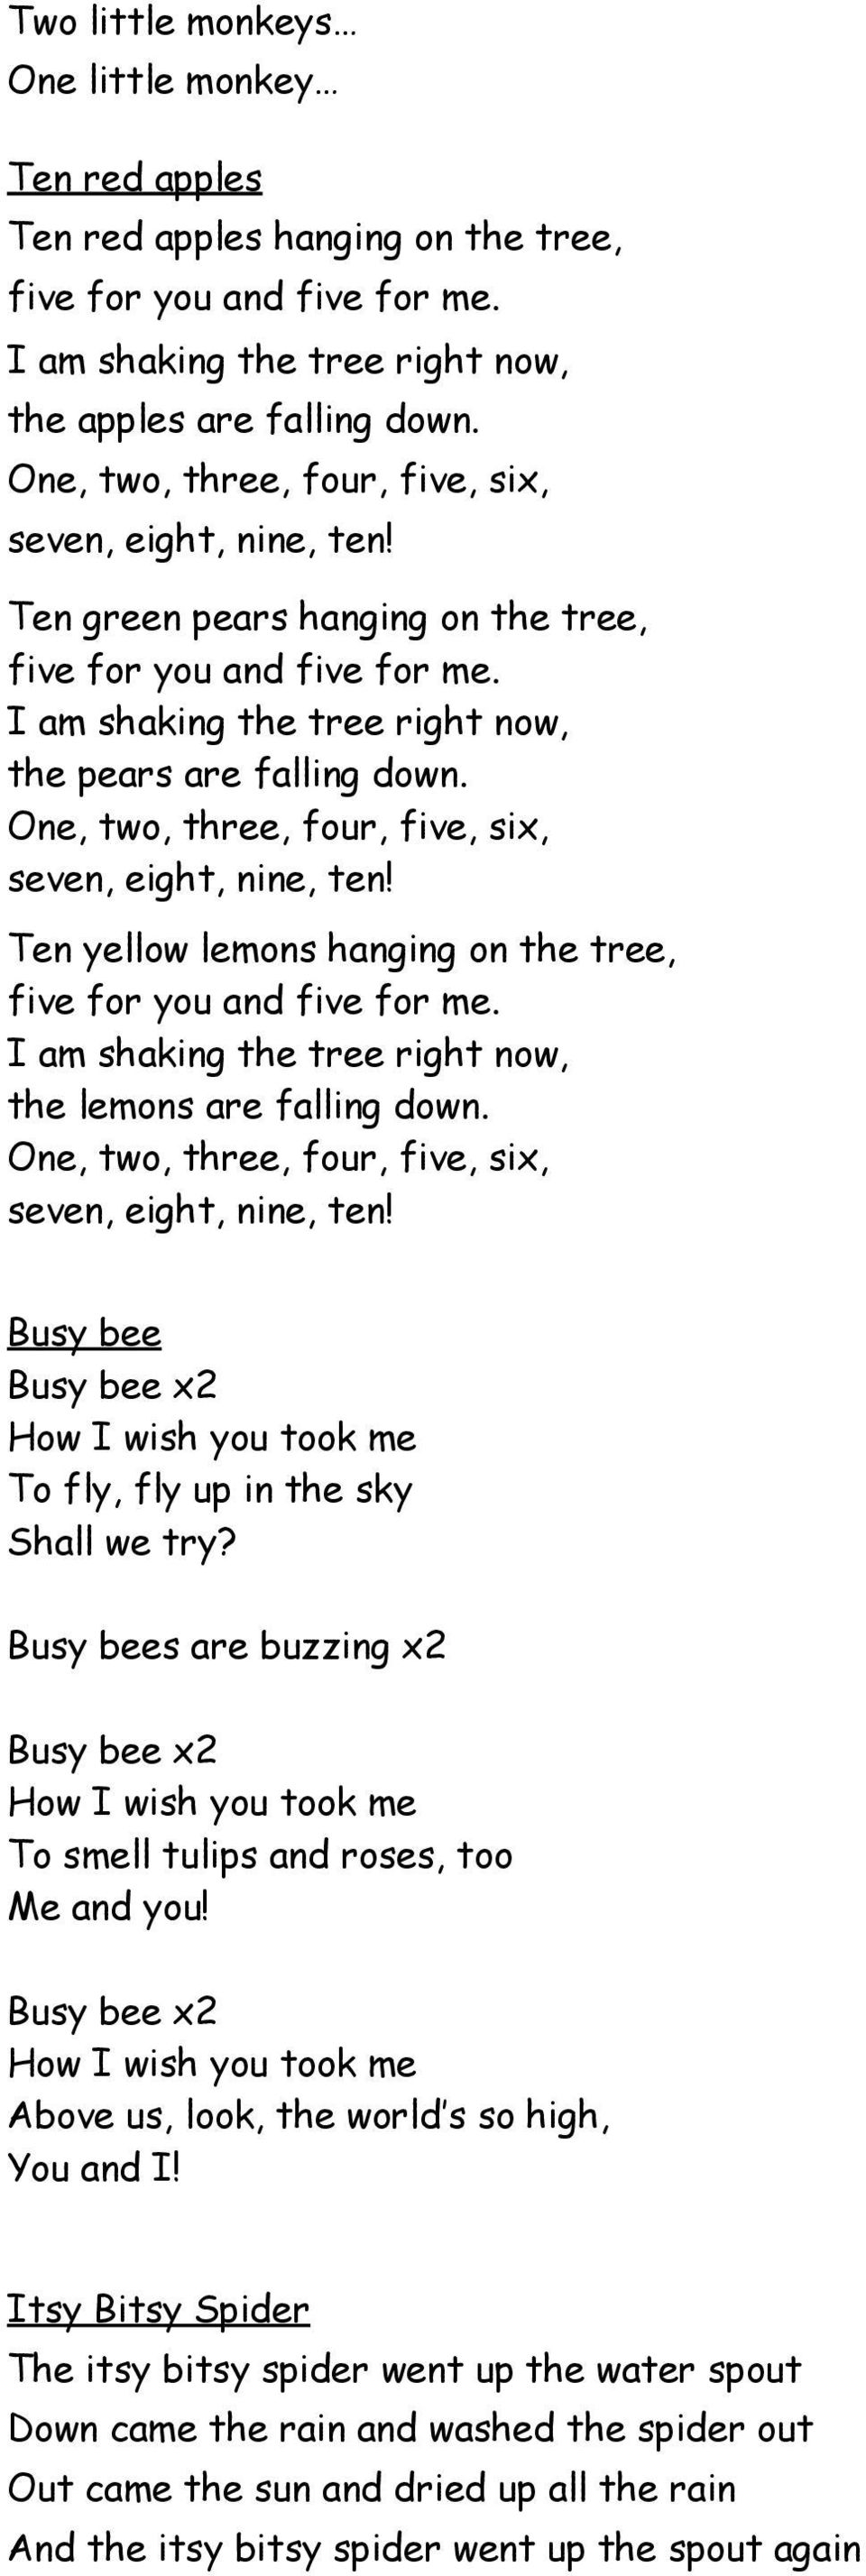 Busy bee To fly, fly up in the sky Shall we try? Busy bees are buzzing x2 To smell tulips and roses, too Me and you!